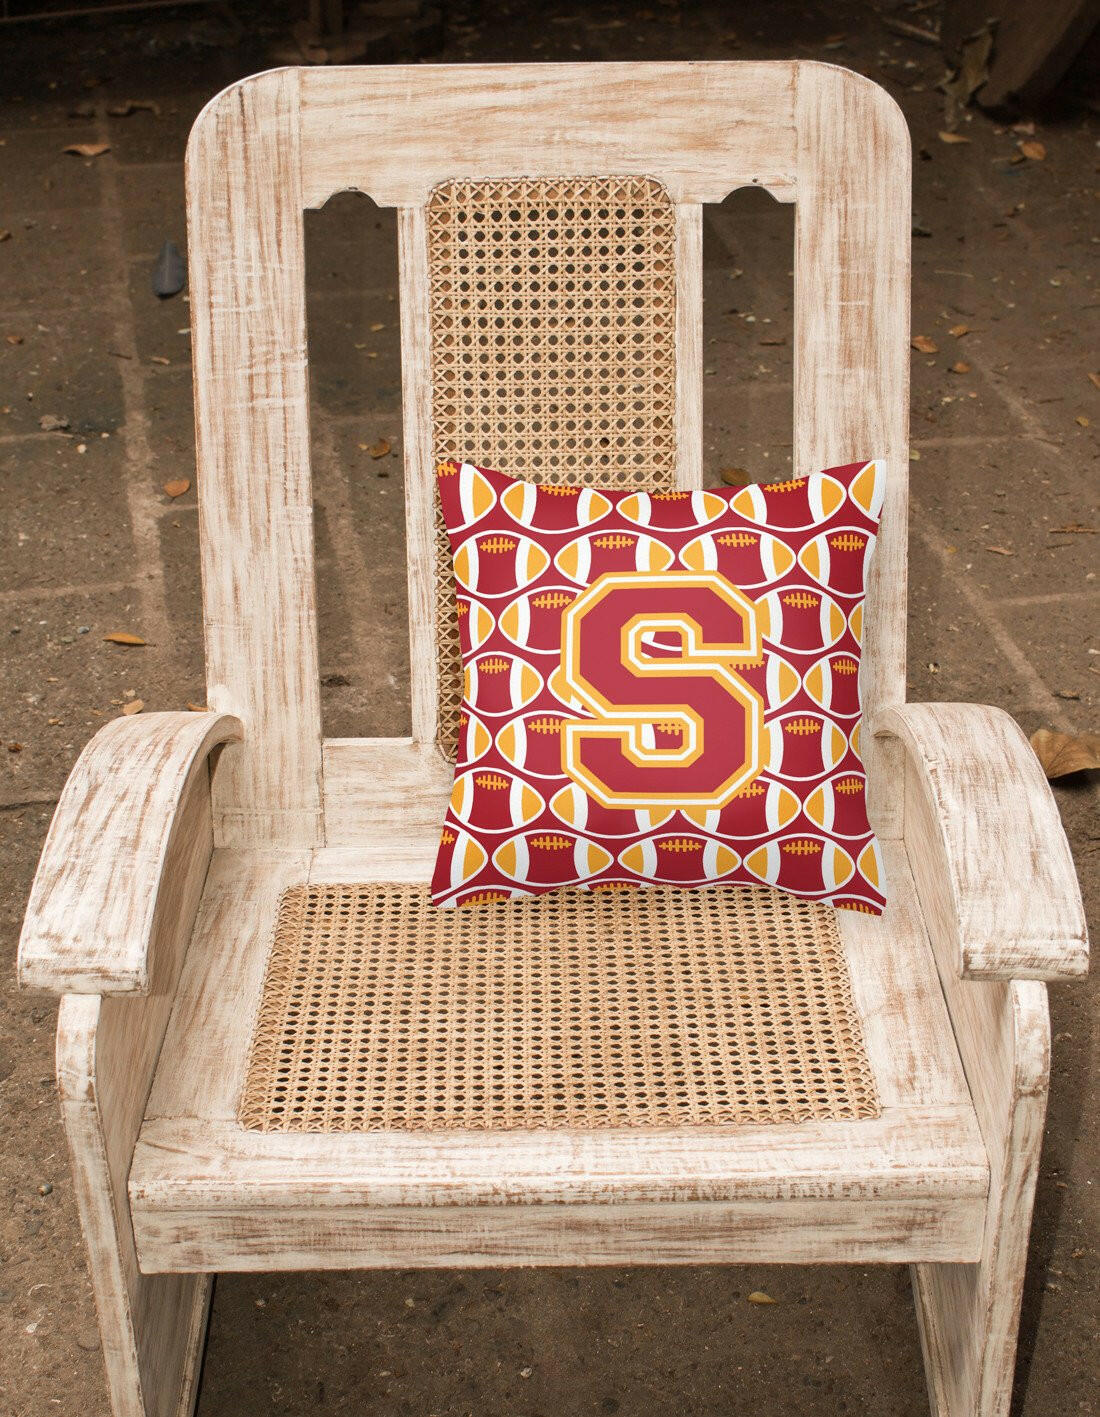 Letter S Football Cardinal and Gold Fabric Decorative Pillow CJ1070-SPW1414 by Caroline's Treasures